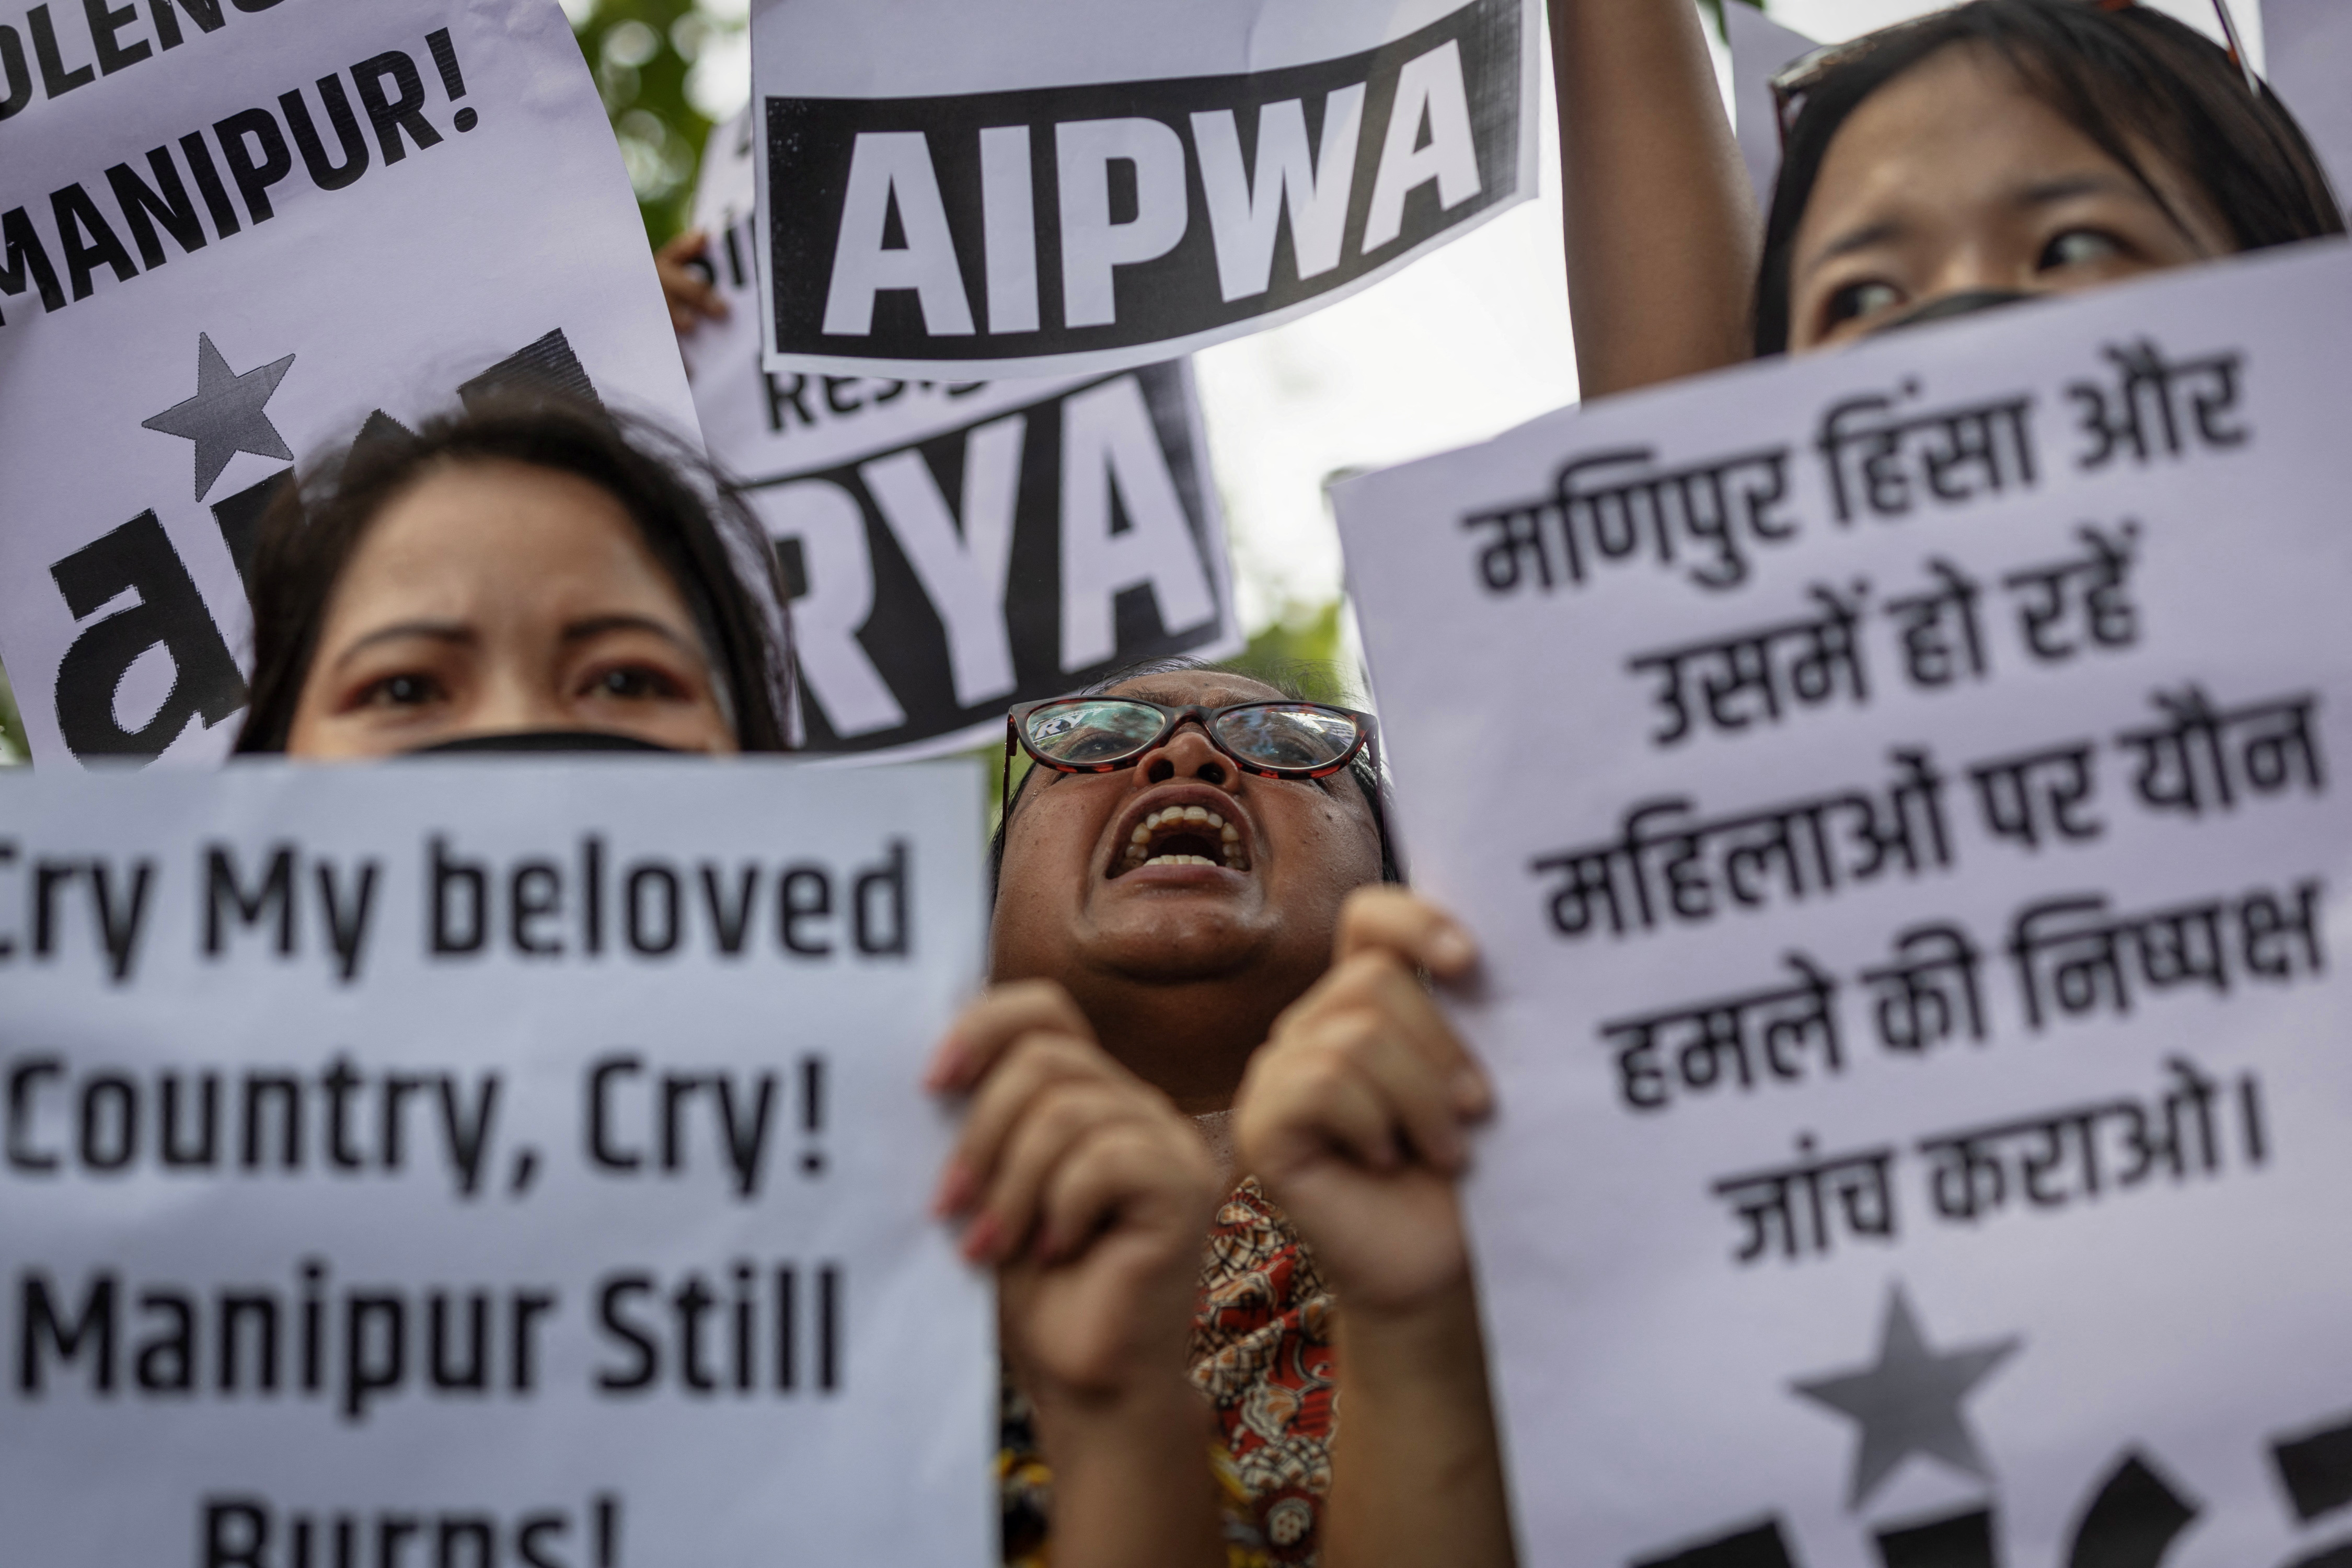 Indian women set fire to house of suspect as Manipur sex assault case triggers outrage Reuters